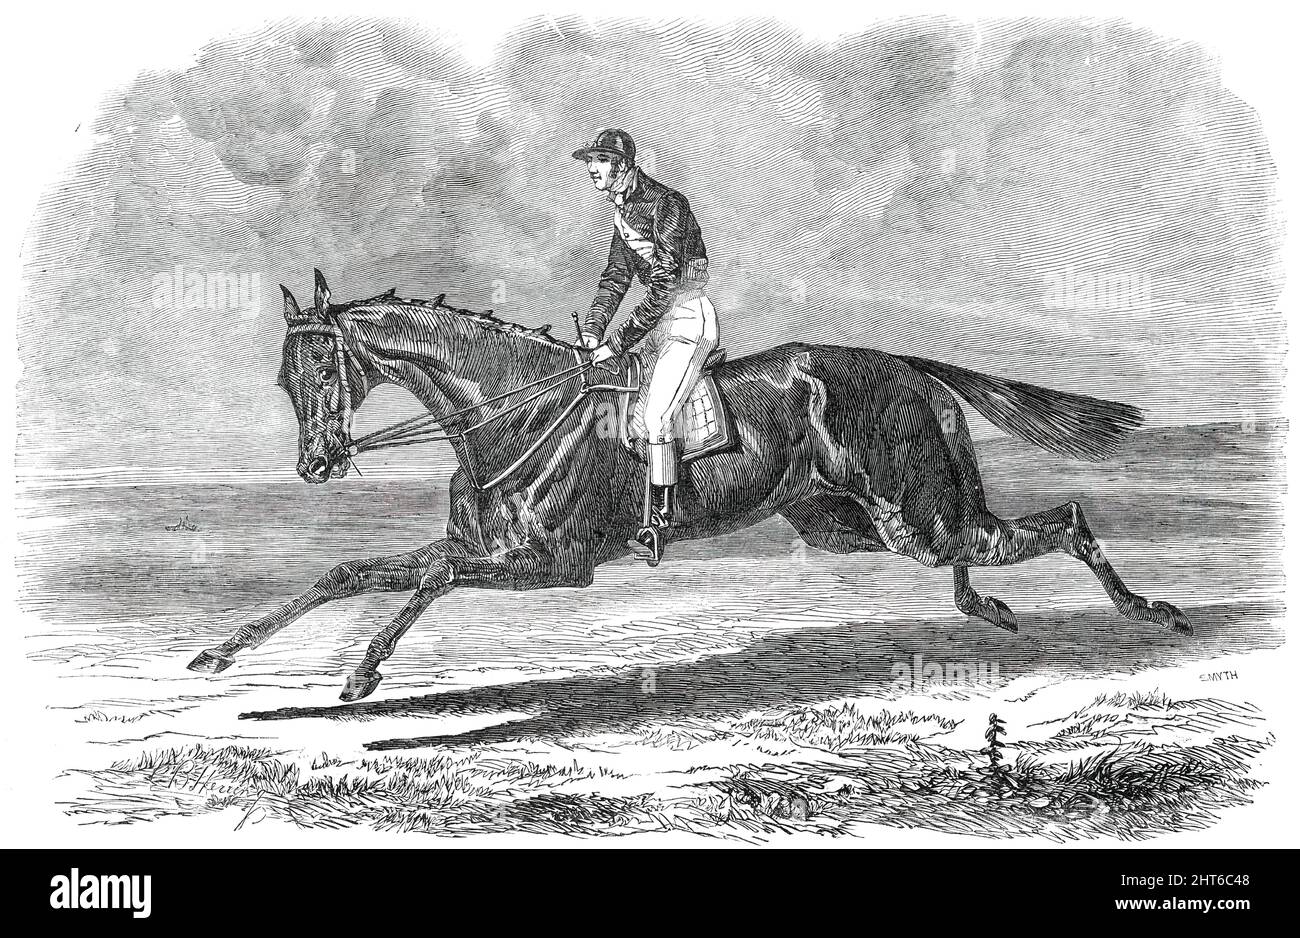 Rhedycina, Winner of the Oaks Stakes, at Epsom, [in Surrey] 1850. Racehorse and jockey: '&quot;Rhedycina&quot; was bred by Mr. Leidiard, of Reading...She was trained by a young man named Goodwin, at Newmarket...The following details of the settling day for the Derby and Oaks are from Bell's Life in London: The principal winners were three or four of Lord Zetland's friends, to the tune of nearly &#xa3;40,000. His Lordship himself, who never ventures more than a trifle upon his horses, won only &#xa3;600; his coachman won &#xa3;2000! and the whole of his establishment threw in for - to them-good Stock Photo